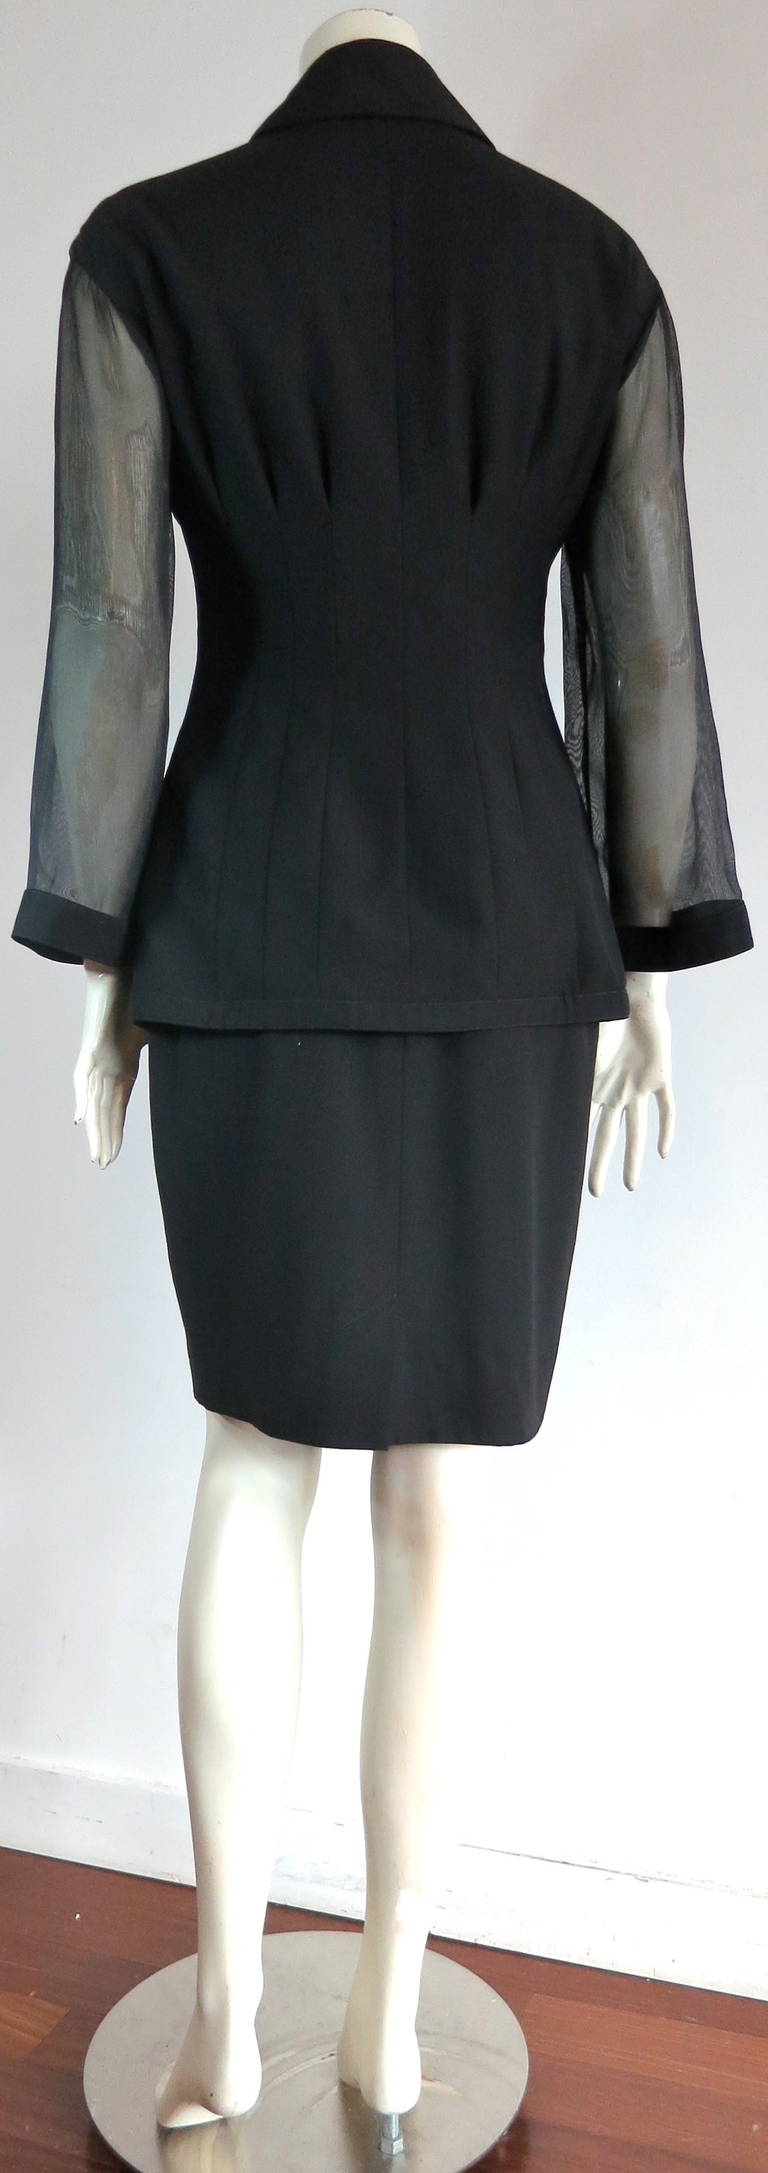 1980's KARL LAGERFELD Black skirt suit with sheer sleeves For Sale 2